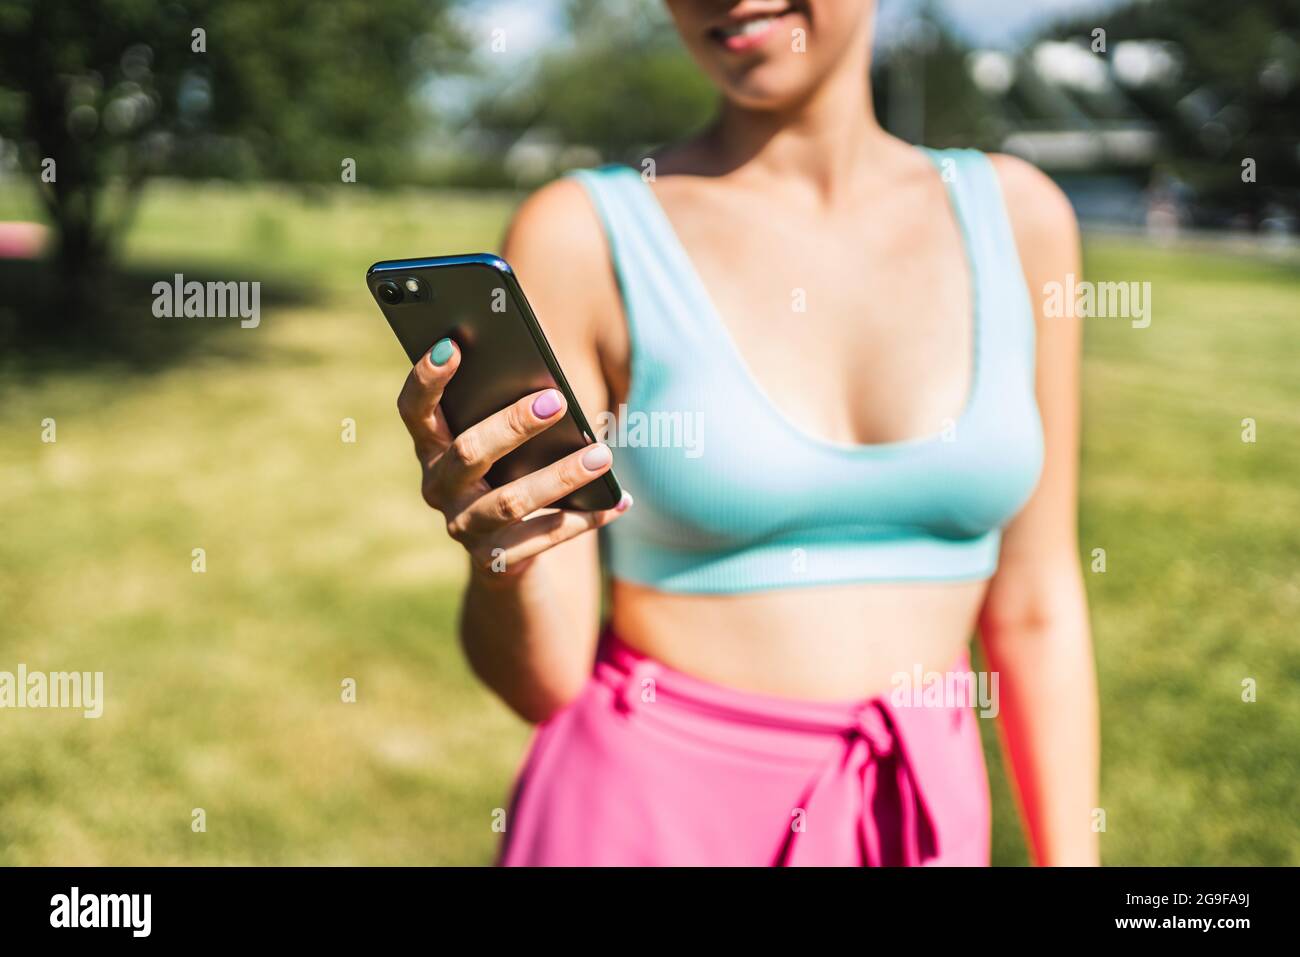 Girl using phone and texting in summer in outdoor park. Woman looking sms message with smartphone. Fit person with cellphone outside in garden. Stock Photo